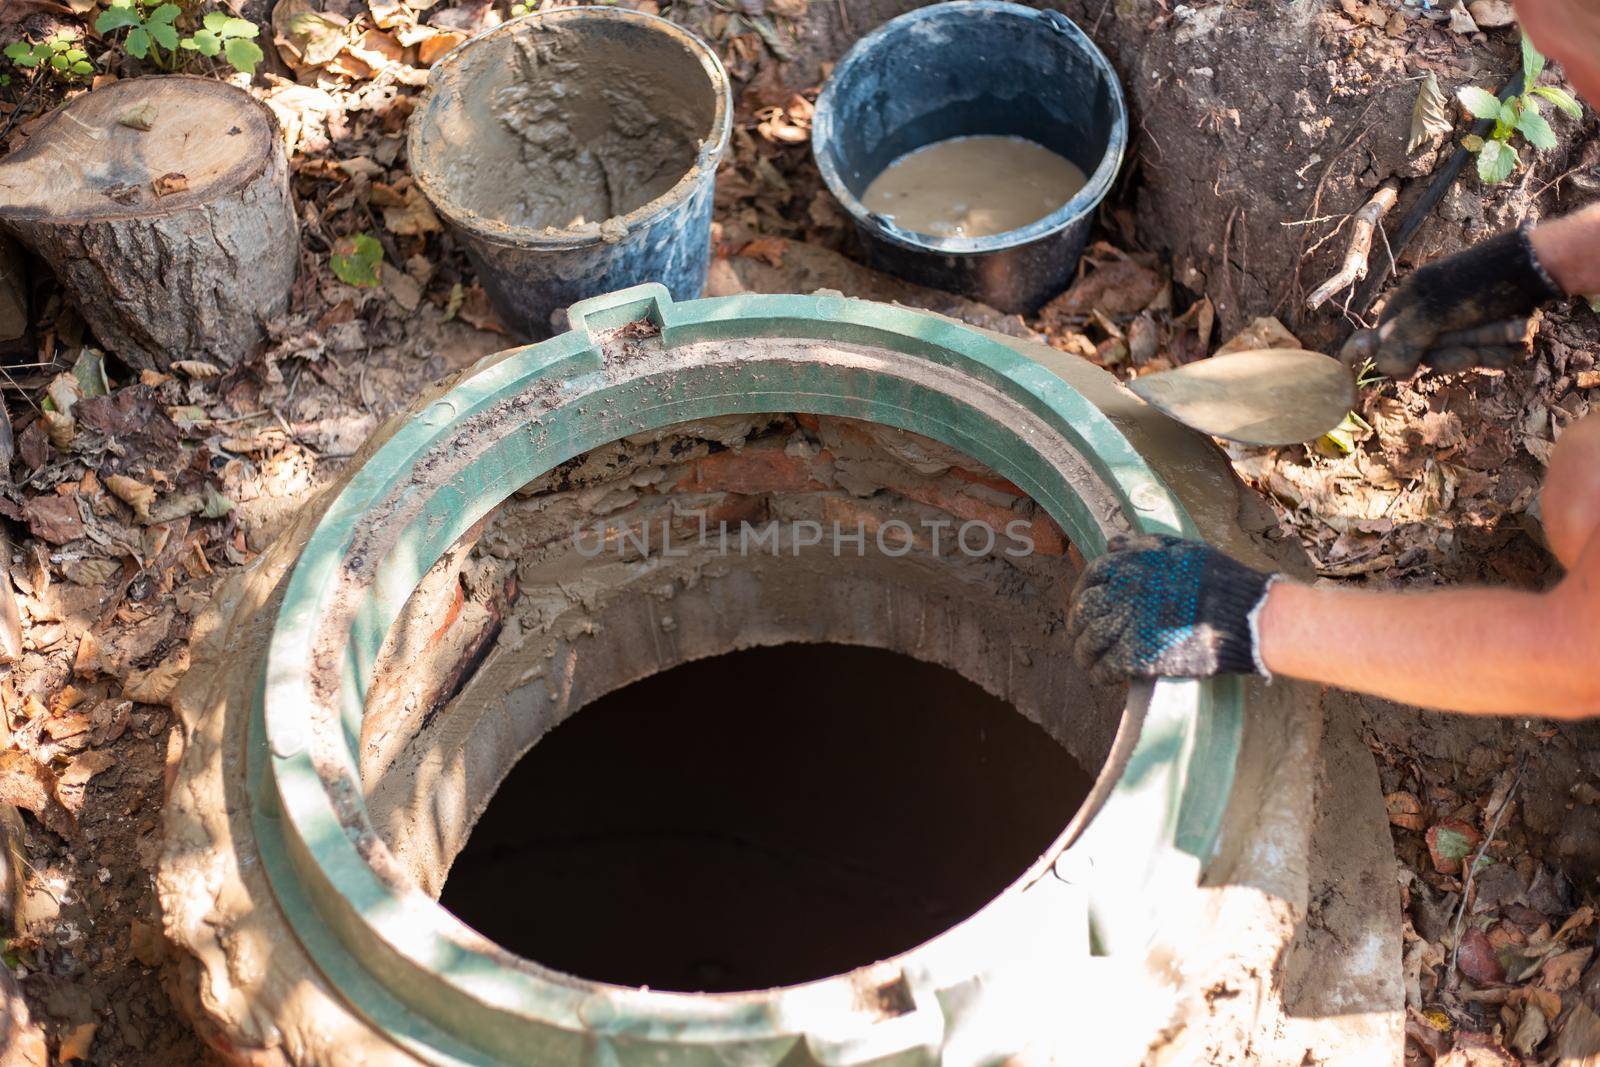 Laying a hatch on a sewer well. The man strengthens the neck of the septic tank by levnat09